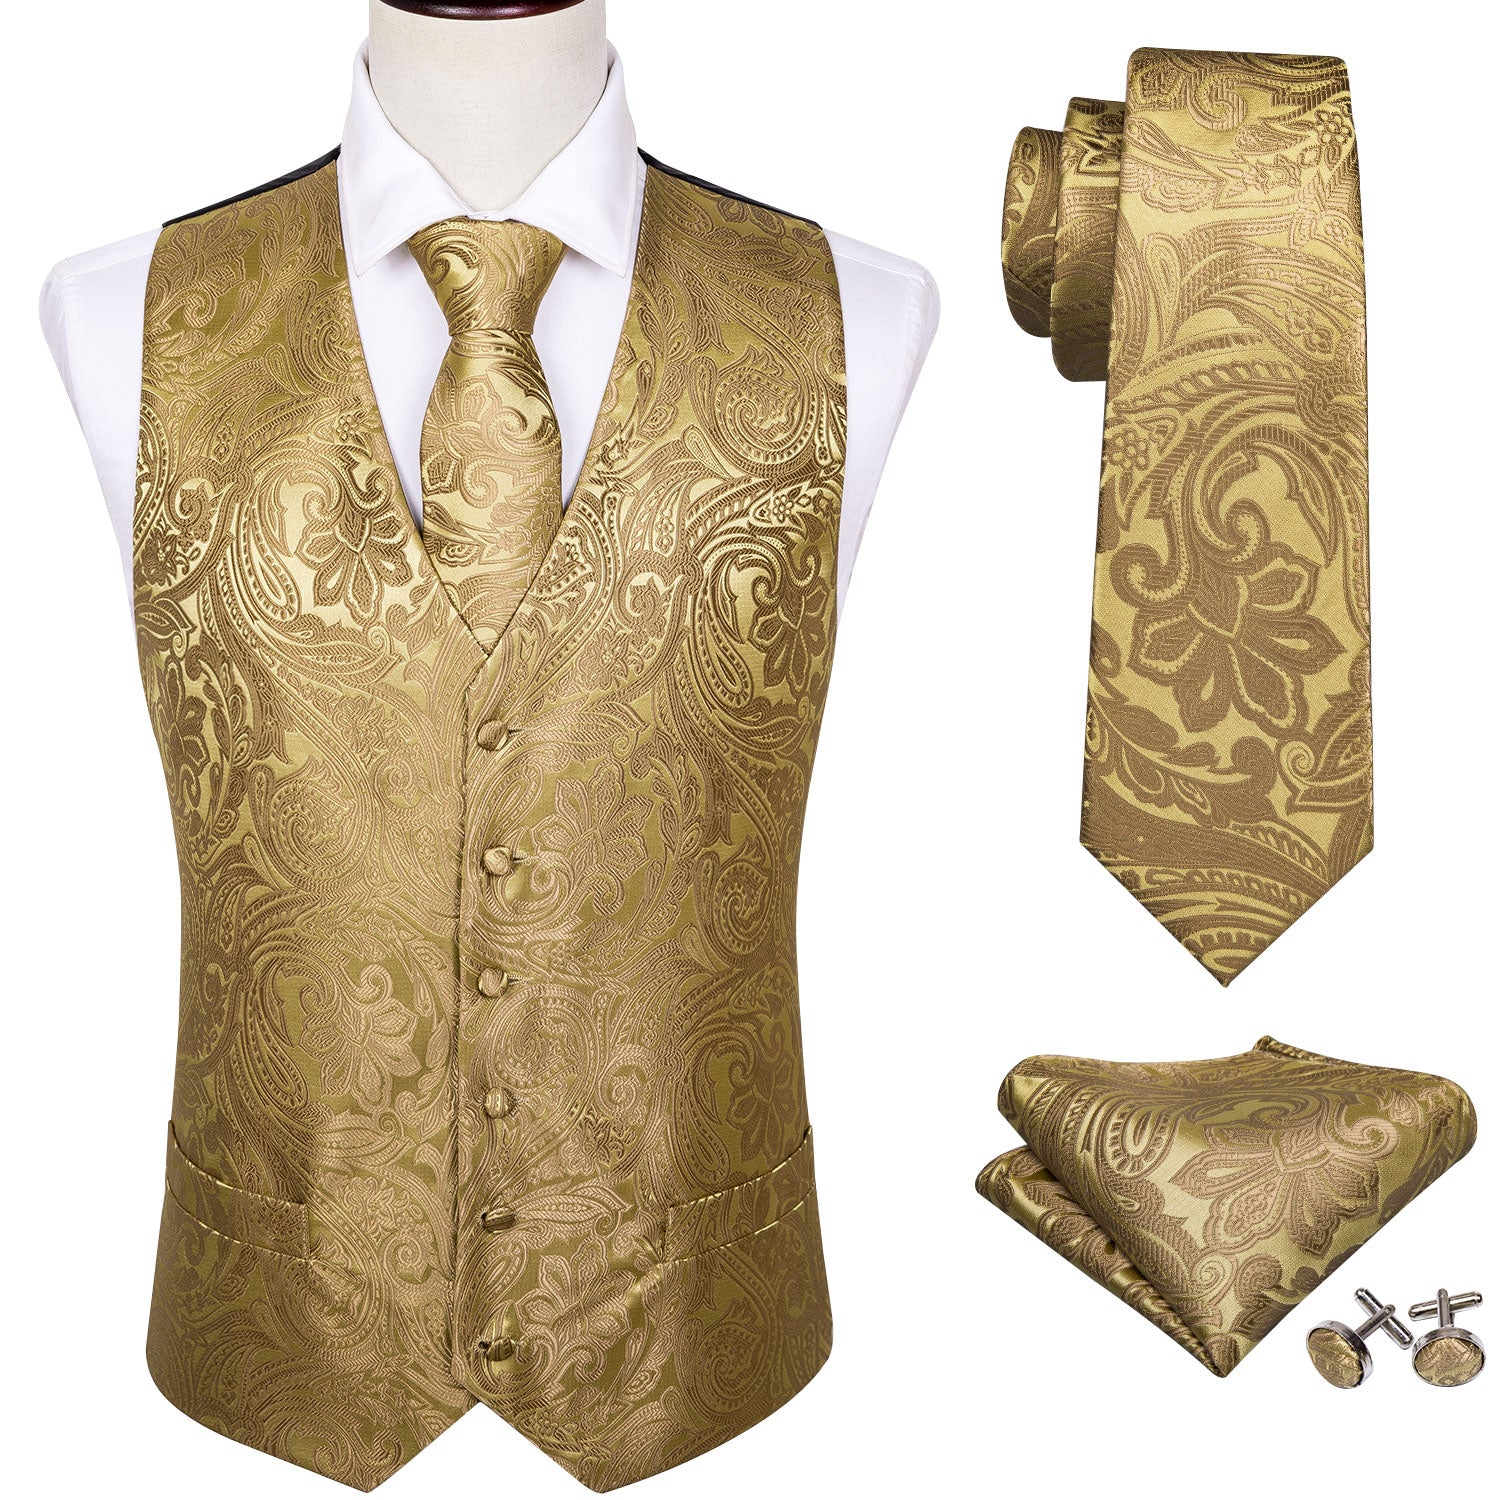 white shirt and gold vest necktie pocket square and cufflinks set